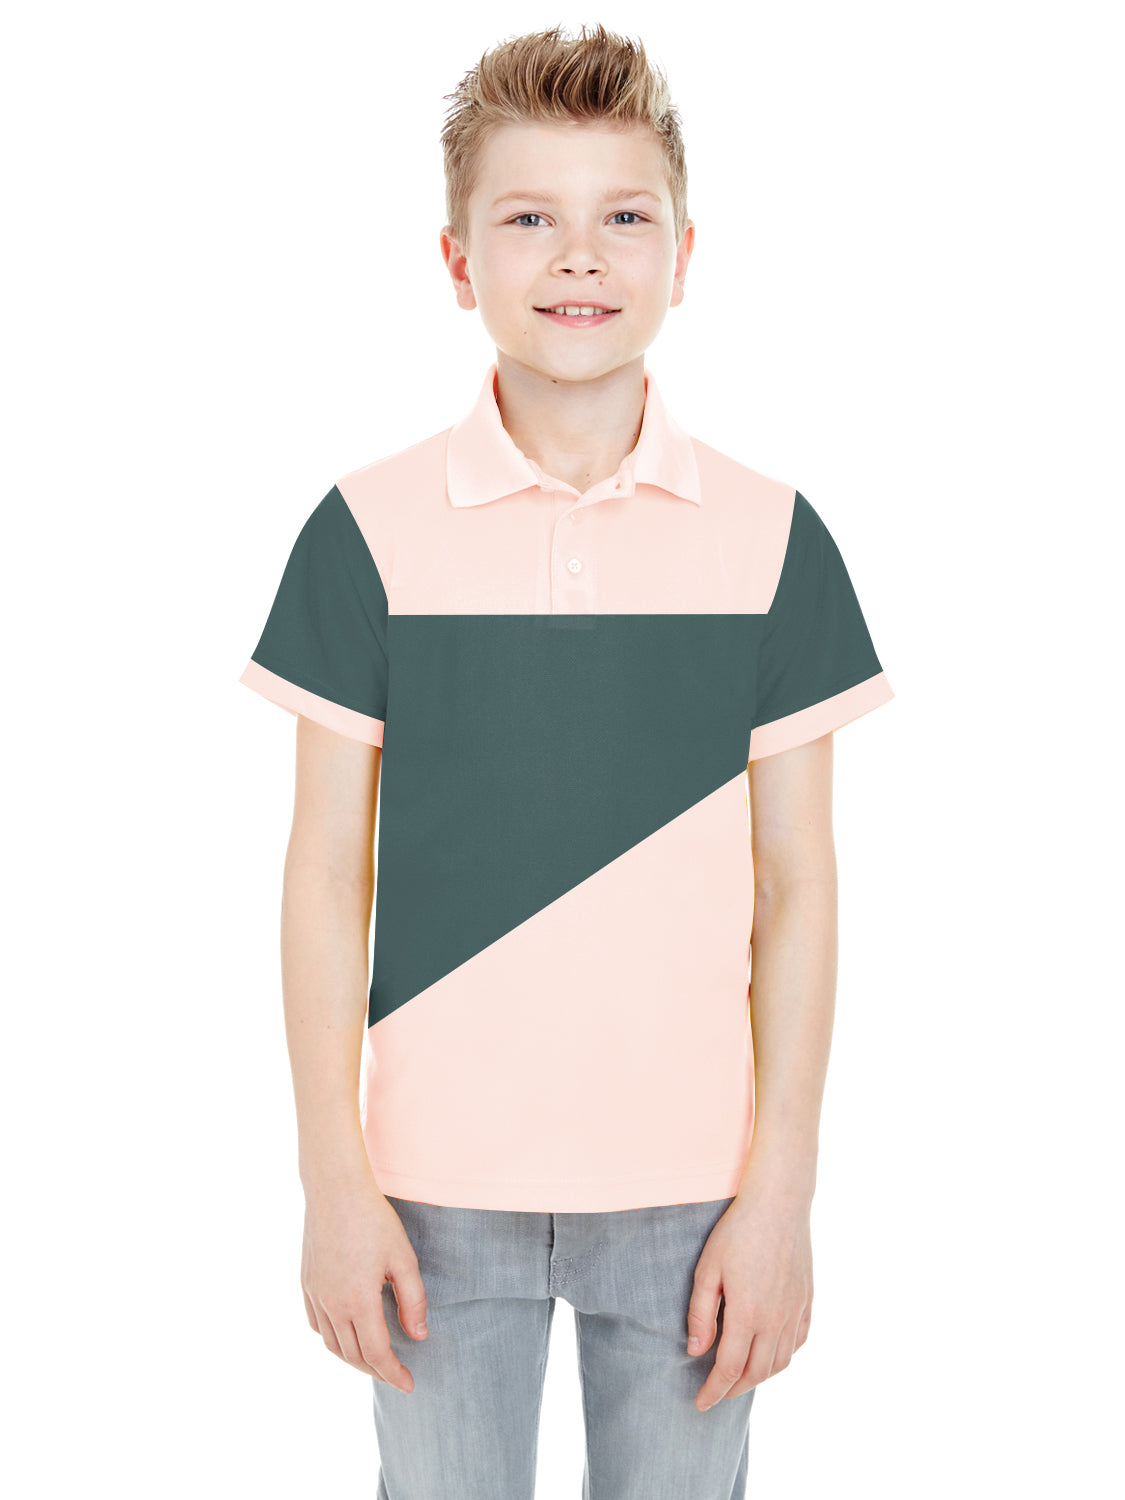 NXT Summer P.Q Polo Shirt For Kids-Baby Pink with Dark Bond Blue-SP1679